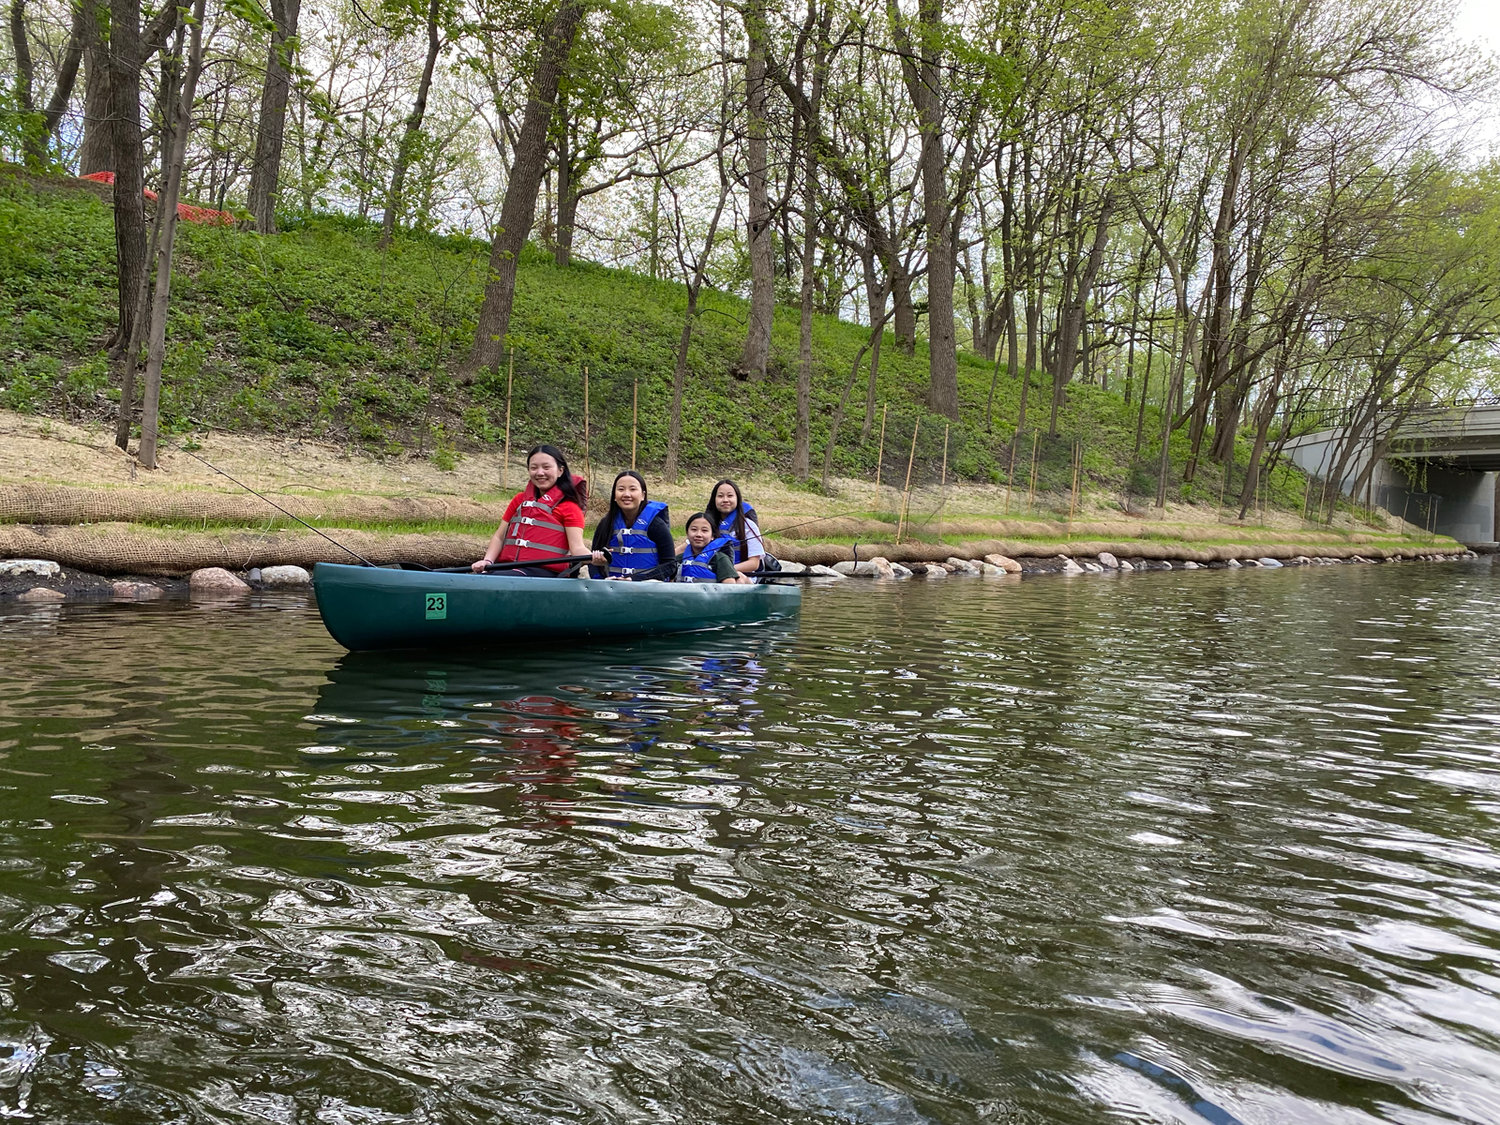 Xe Moua (left), with sisters Youa, Linda and Anna Yang of North Minneapolis, fish for bass in the Kenilworth Channel between Lake of the Isles and Cedar Lake on May 15. (Photo by Tesha M. Christensen)